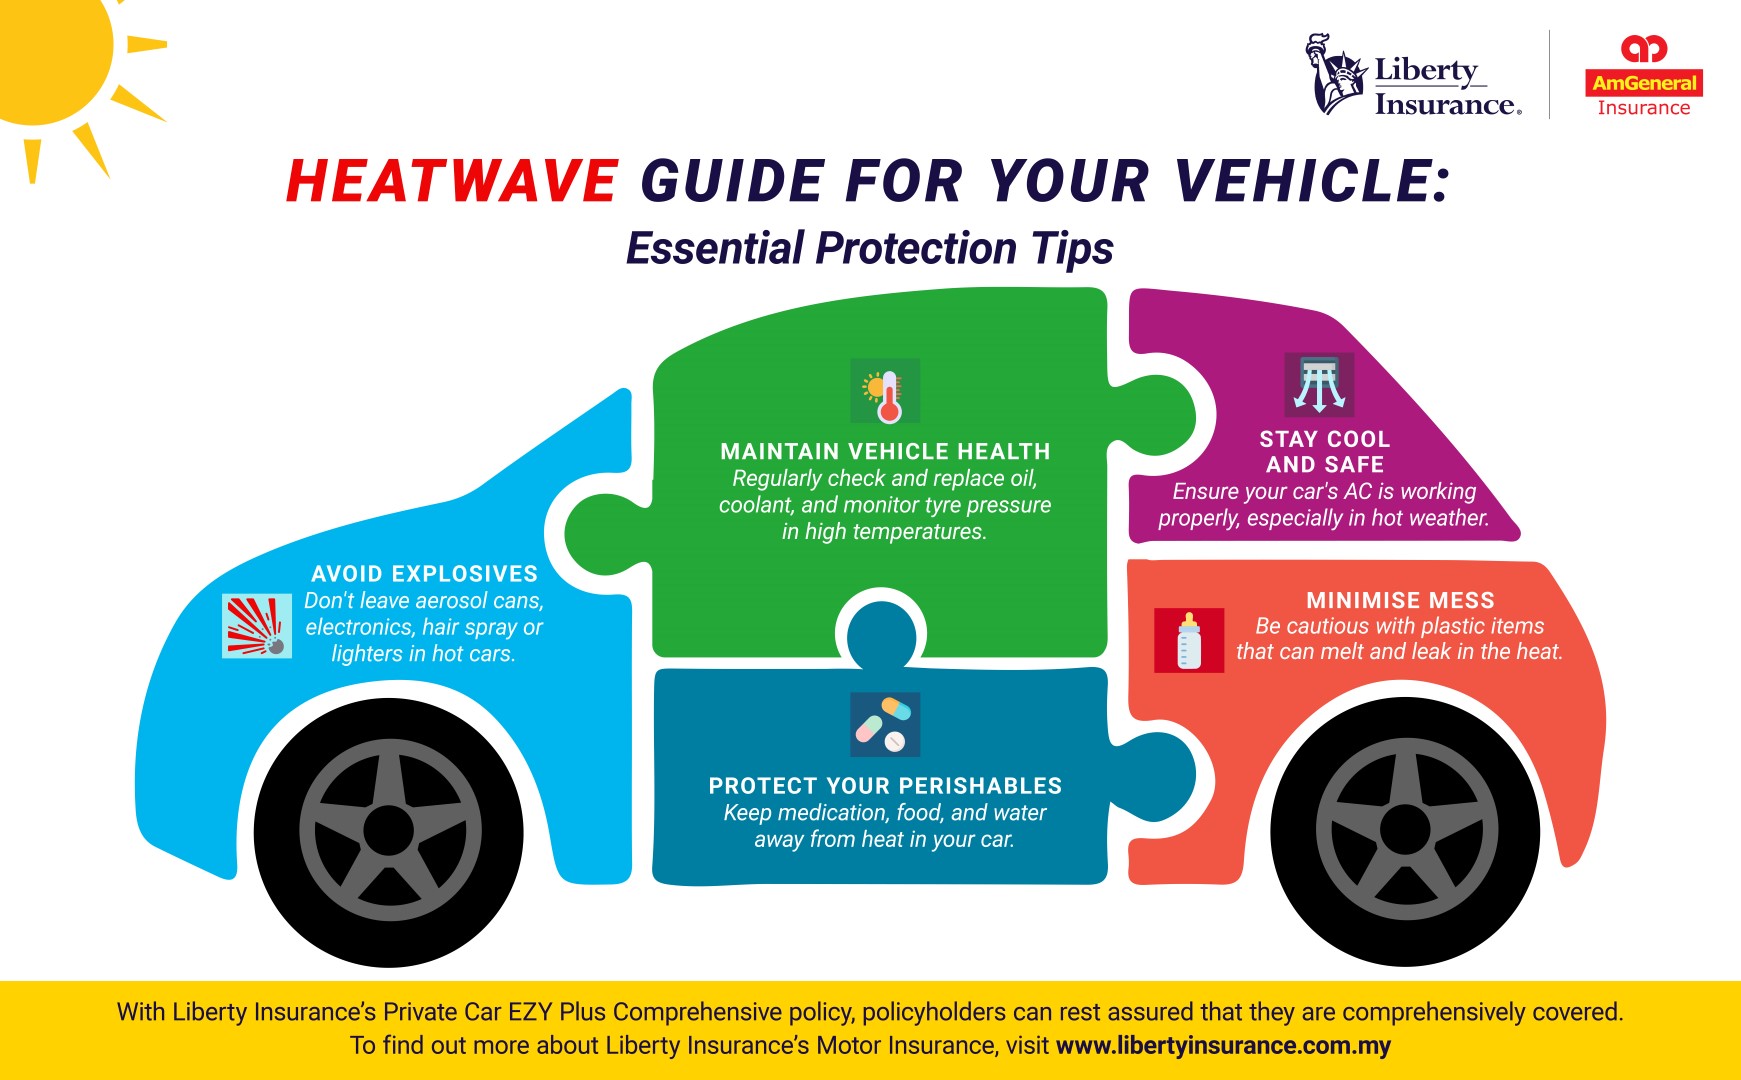 How to Keep Electronics Cool in a Hot Car  : Essential Tips for Protection